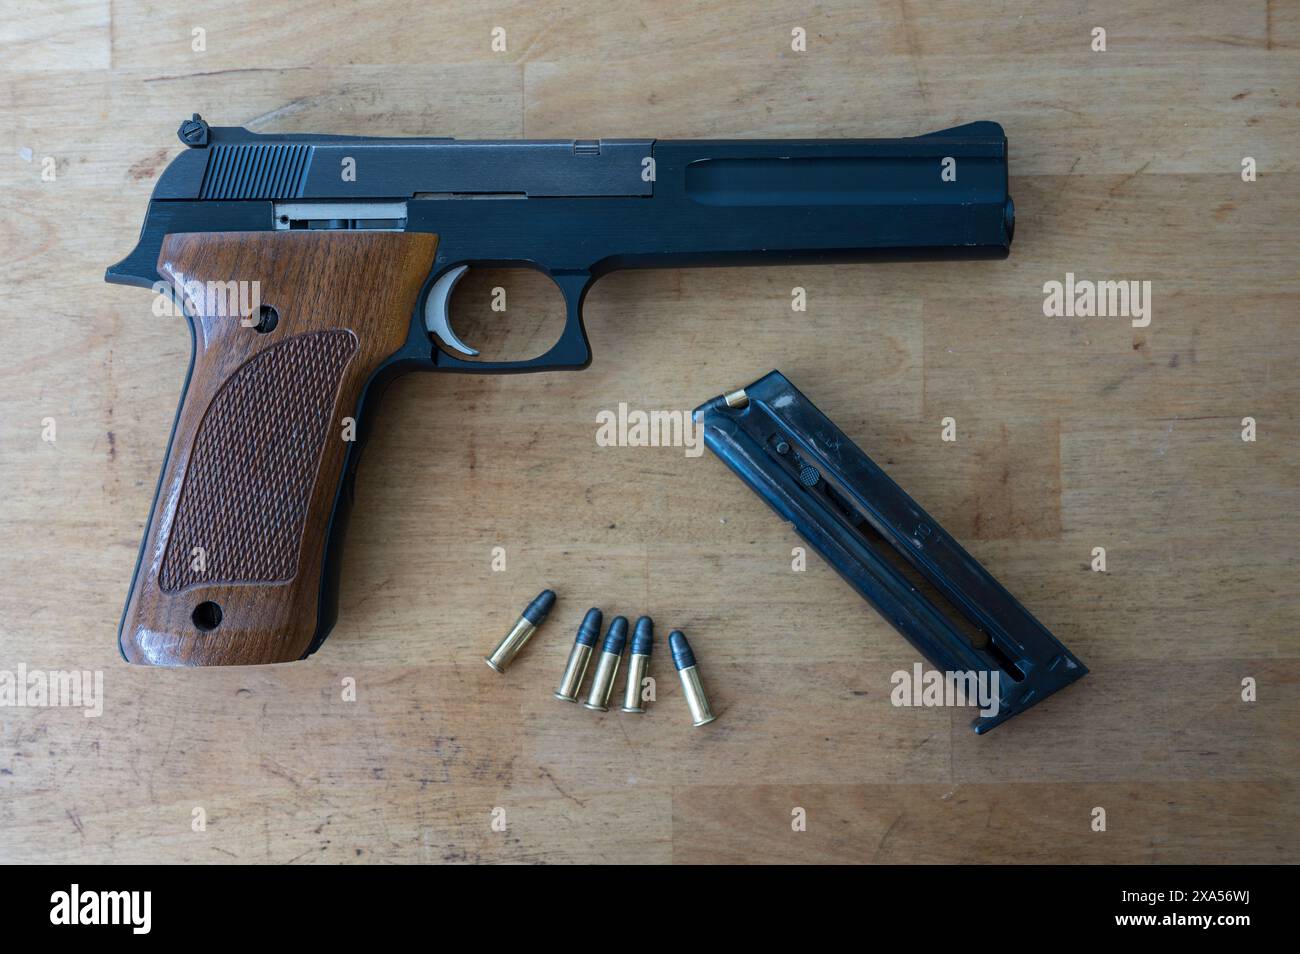 A nice classic .22 caliber pistol, a loaded magazine and a few standard bullets on the wooden table Stock Photo